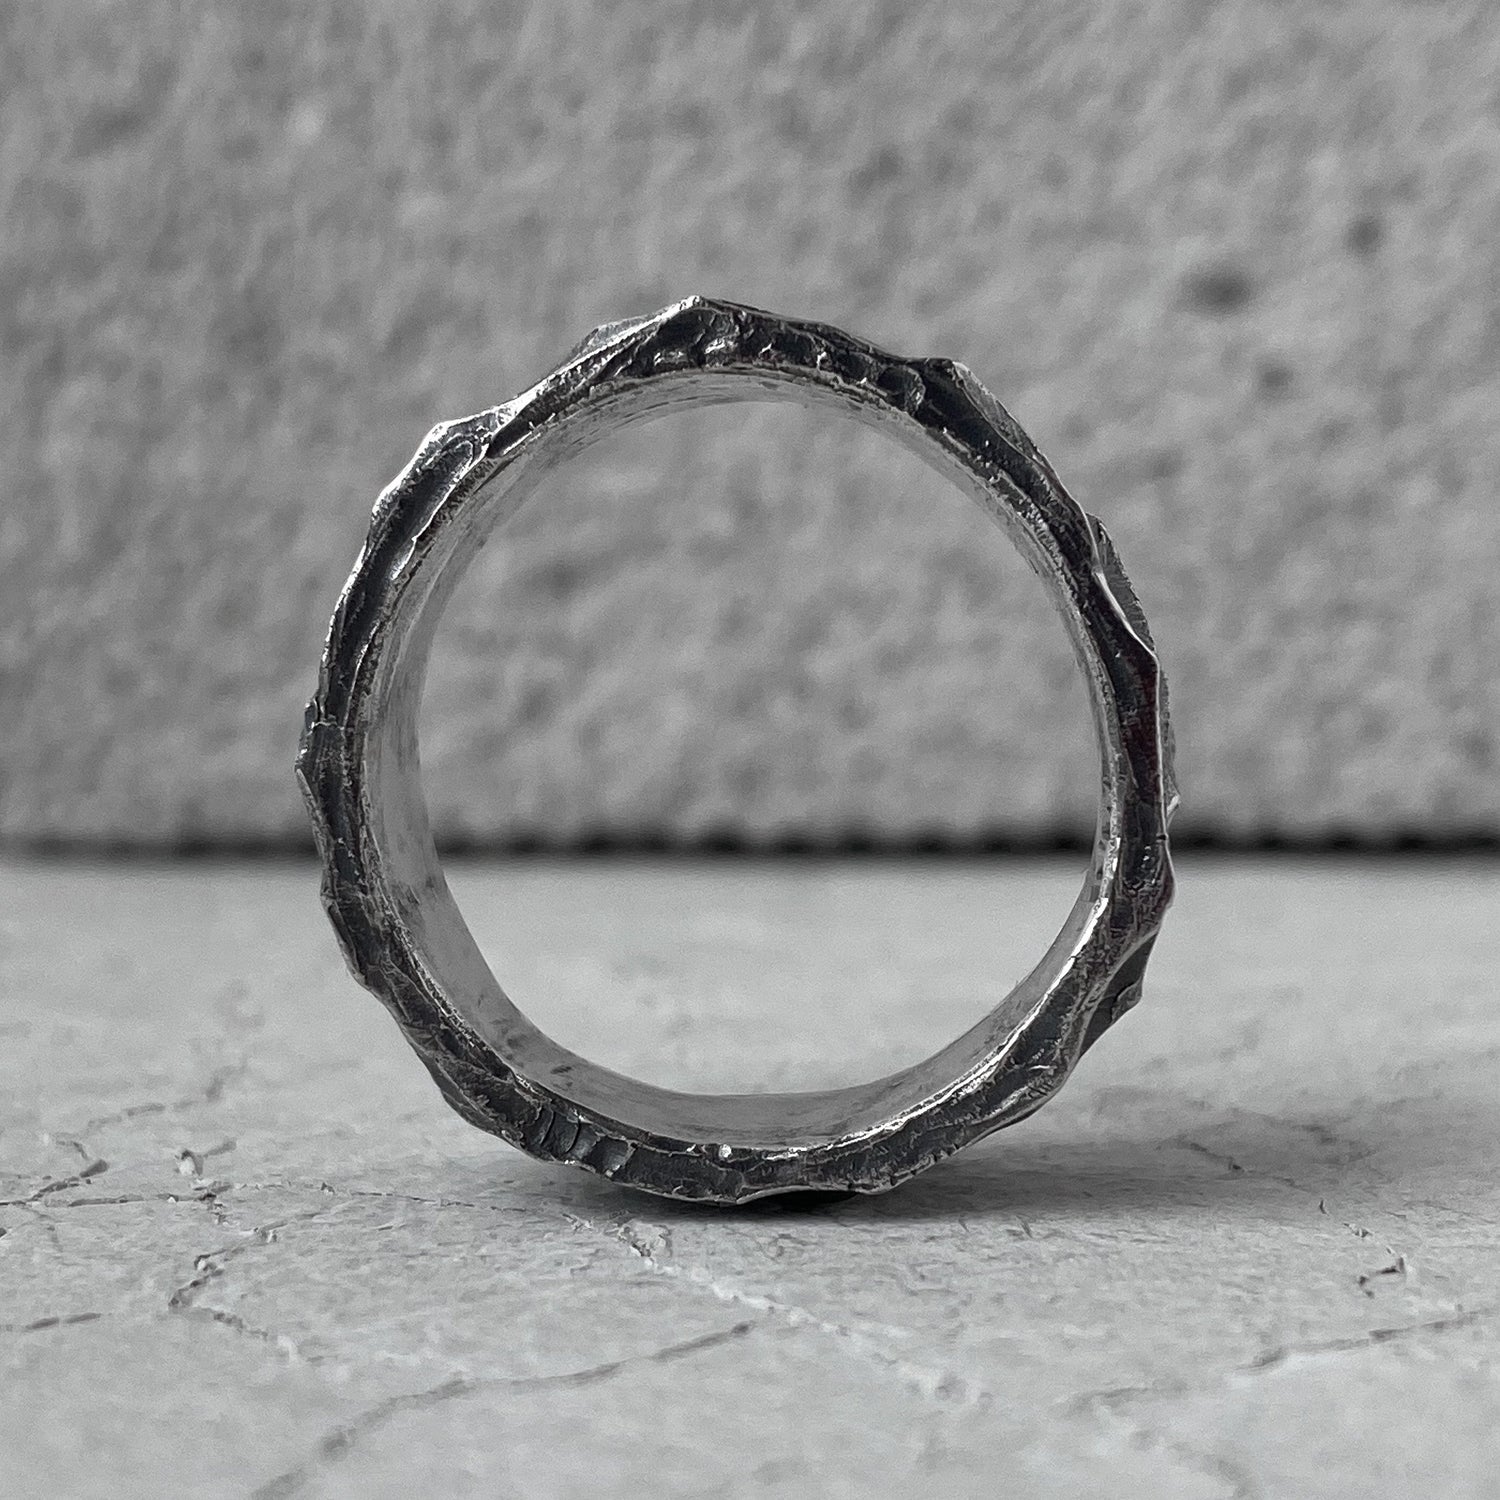 WAVE ring- wide band ring annular strip with a texture resembling surging waves on the surface Band rings Project50g 